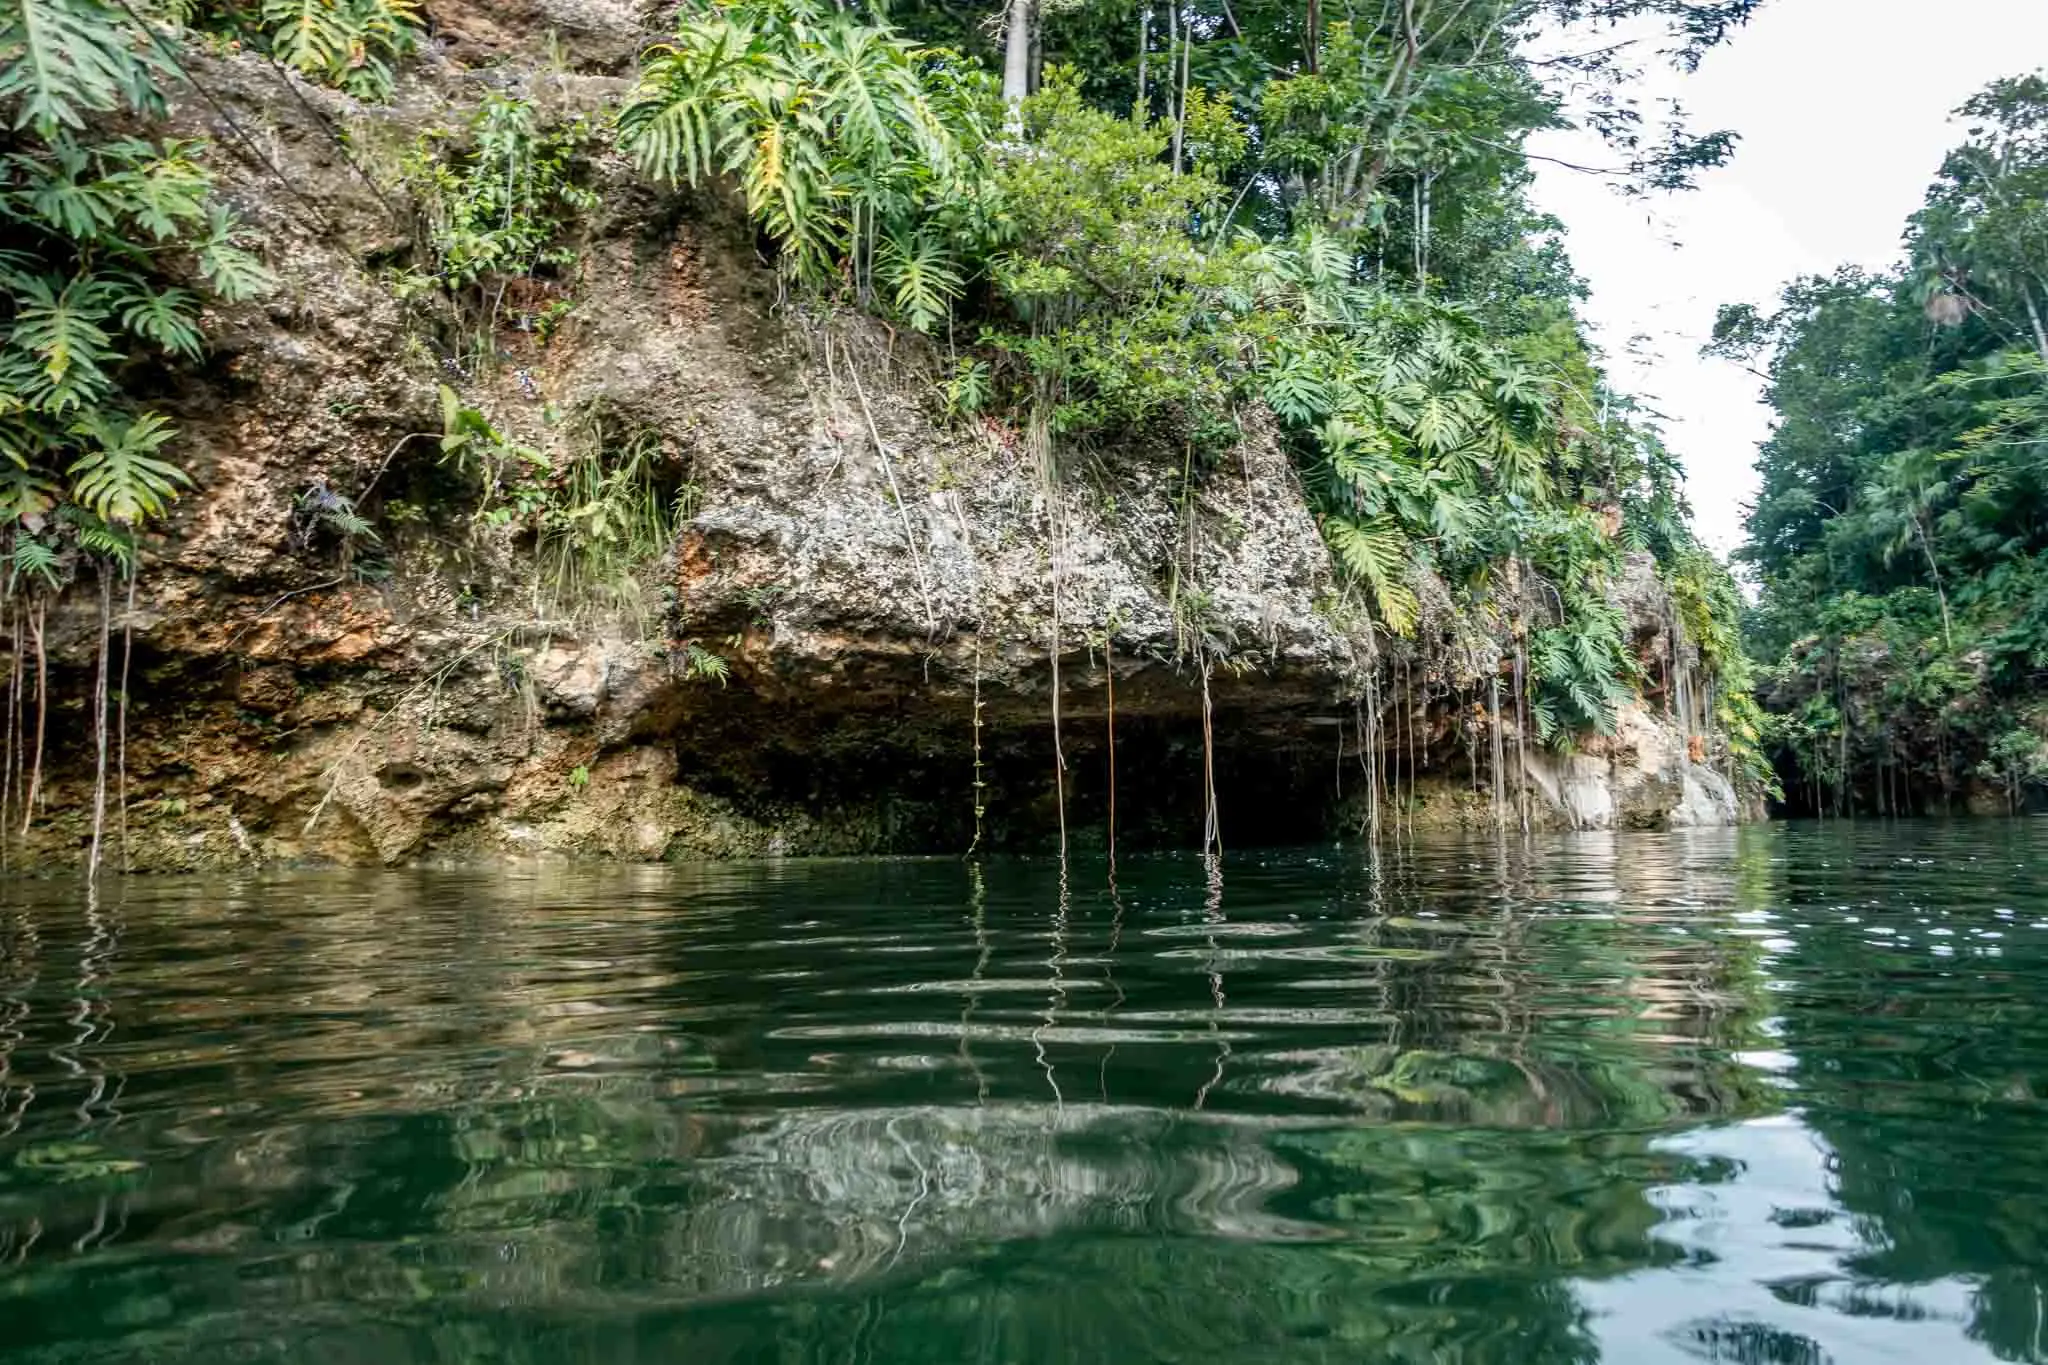 Rocky cliffs covered in plants leading down to water in a cenote